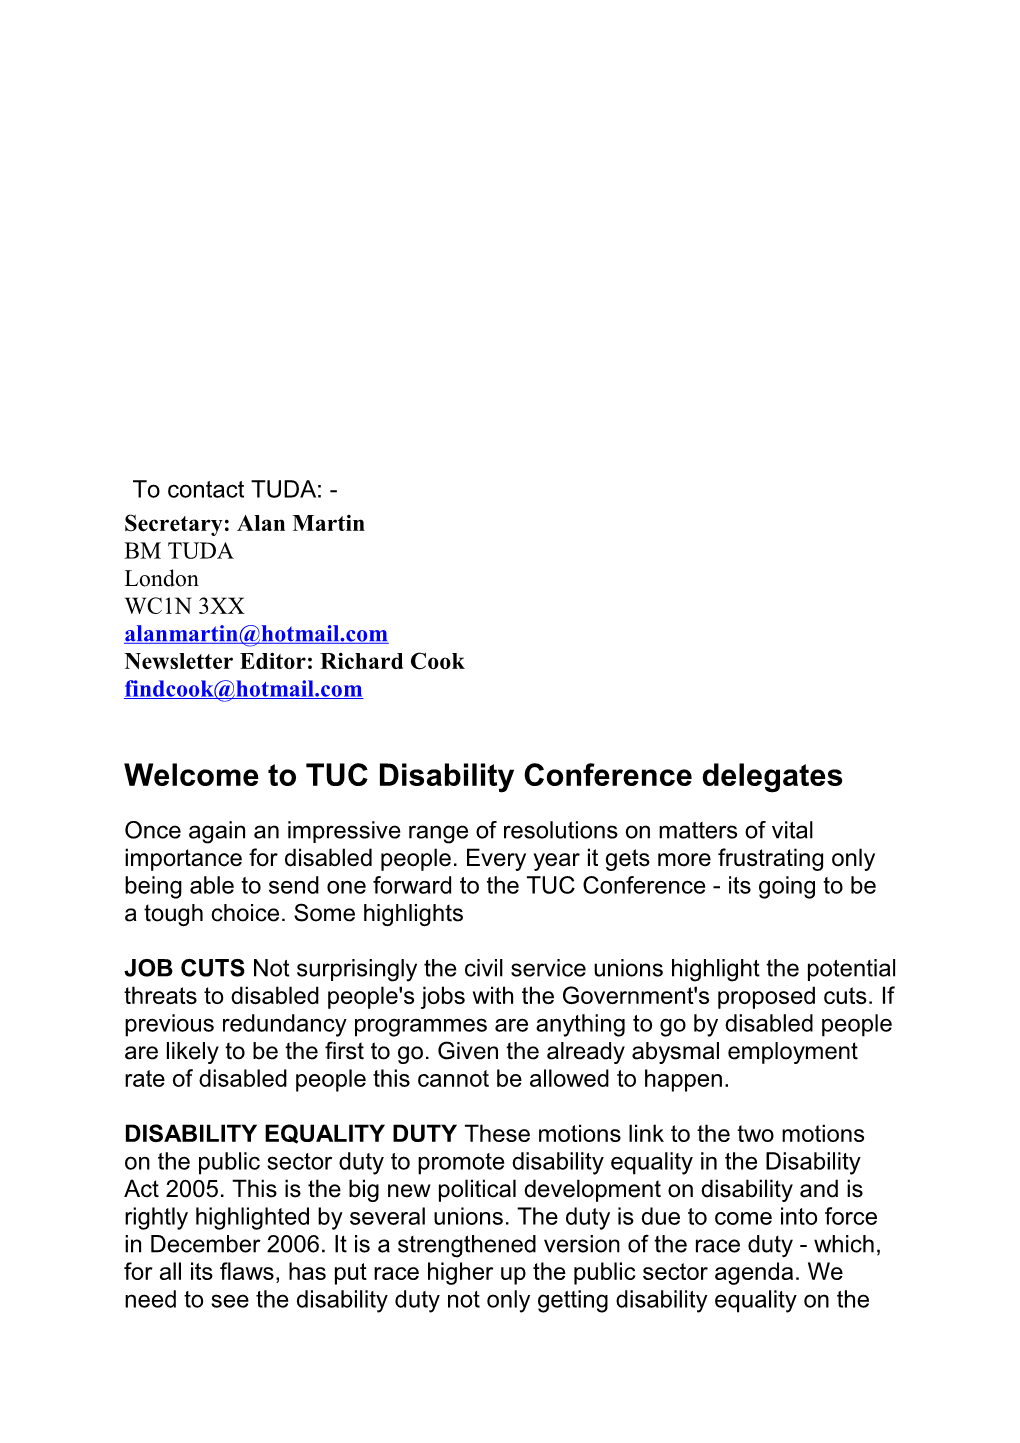 Tuda News -Special TUC Disability Conference Edition